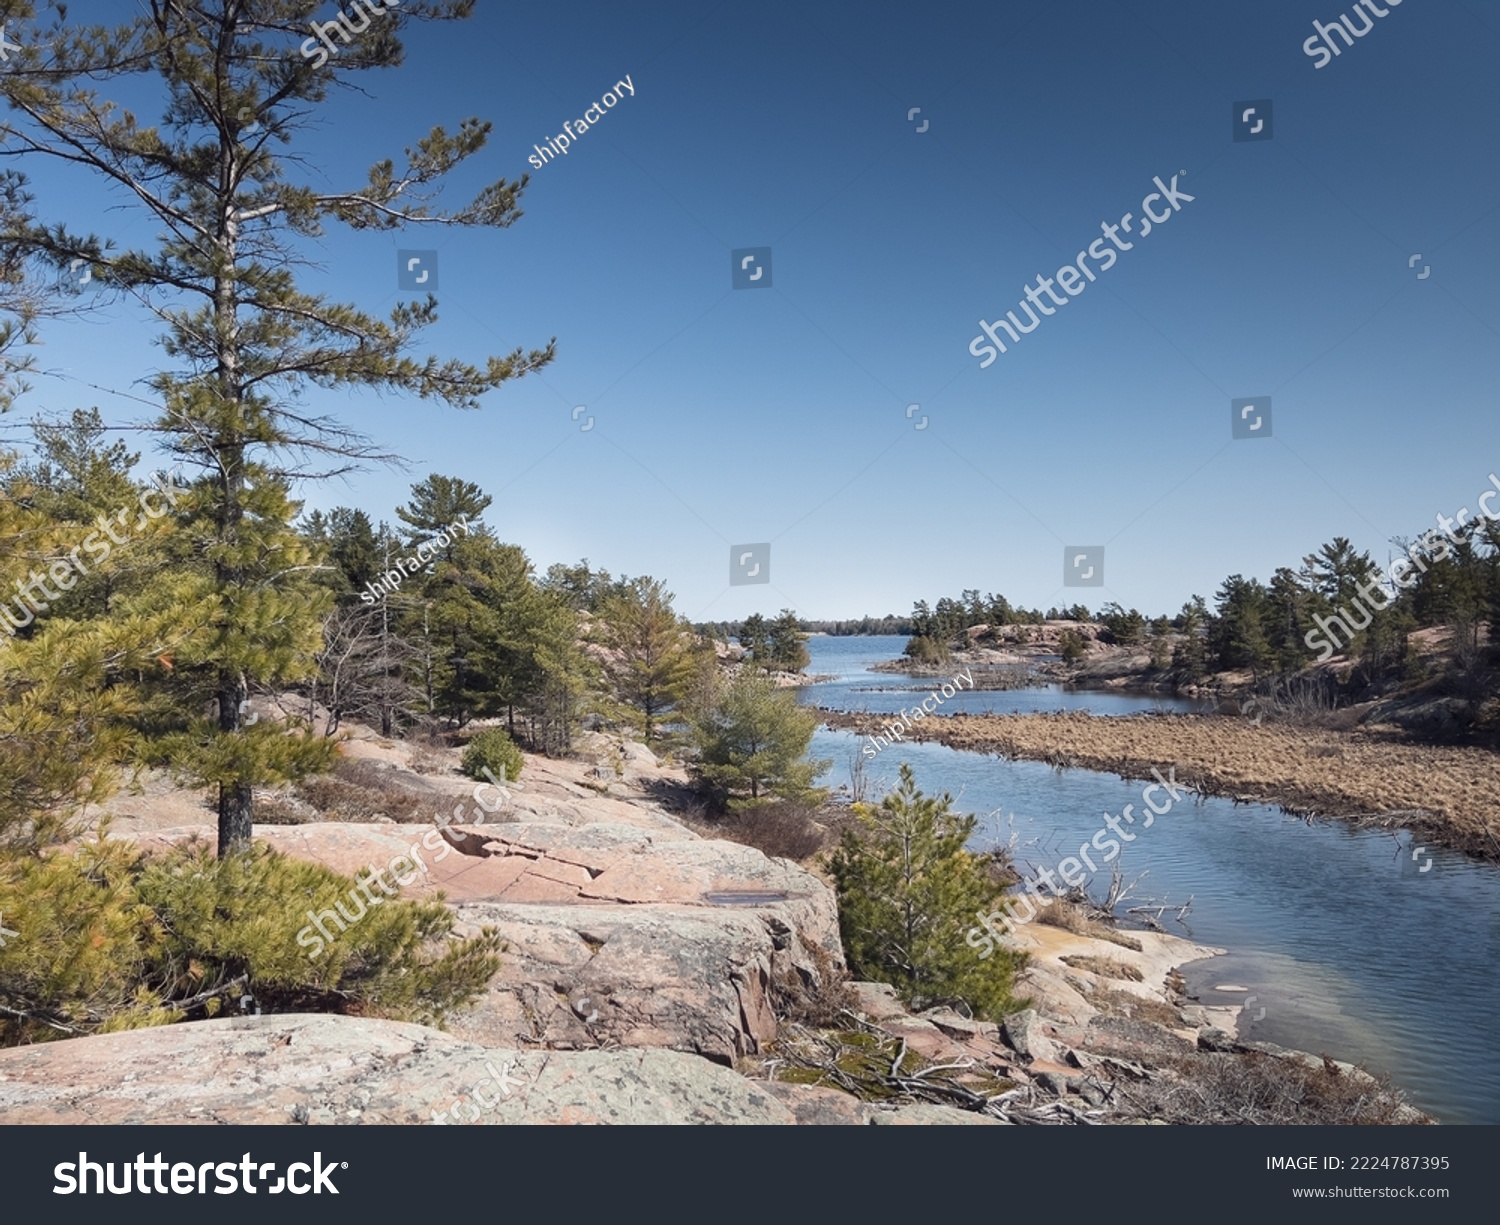 Scenic view of river flowing by trees and rock formations against clear blue sky in forest during sunny day #2224787395